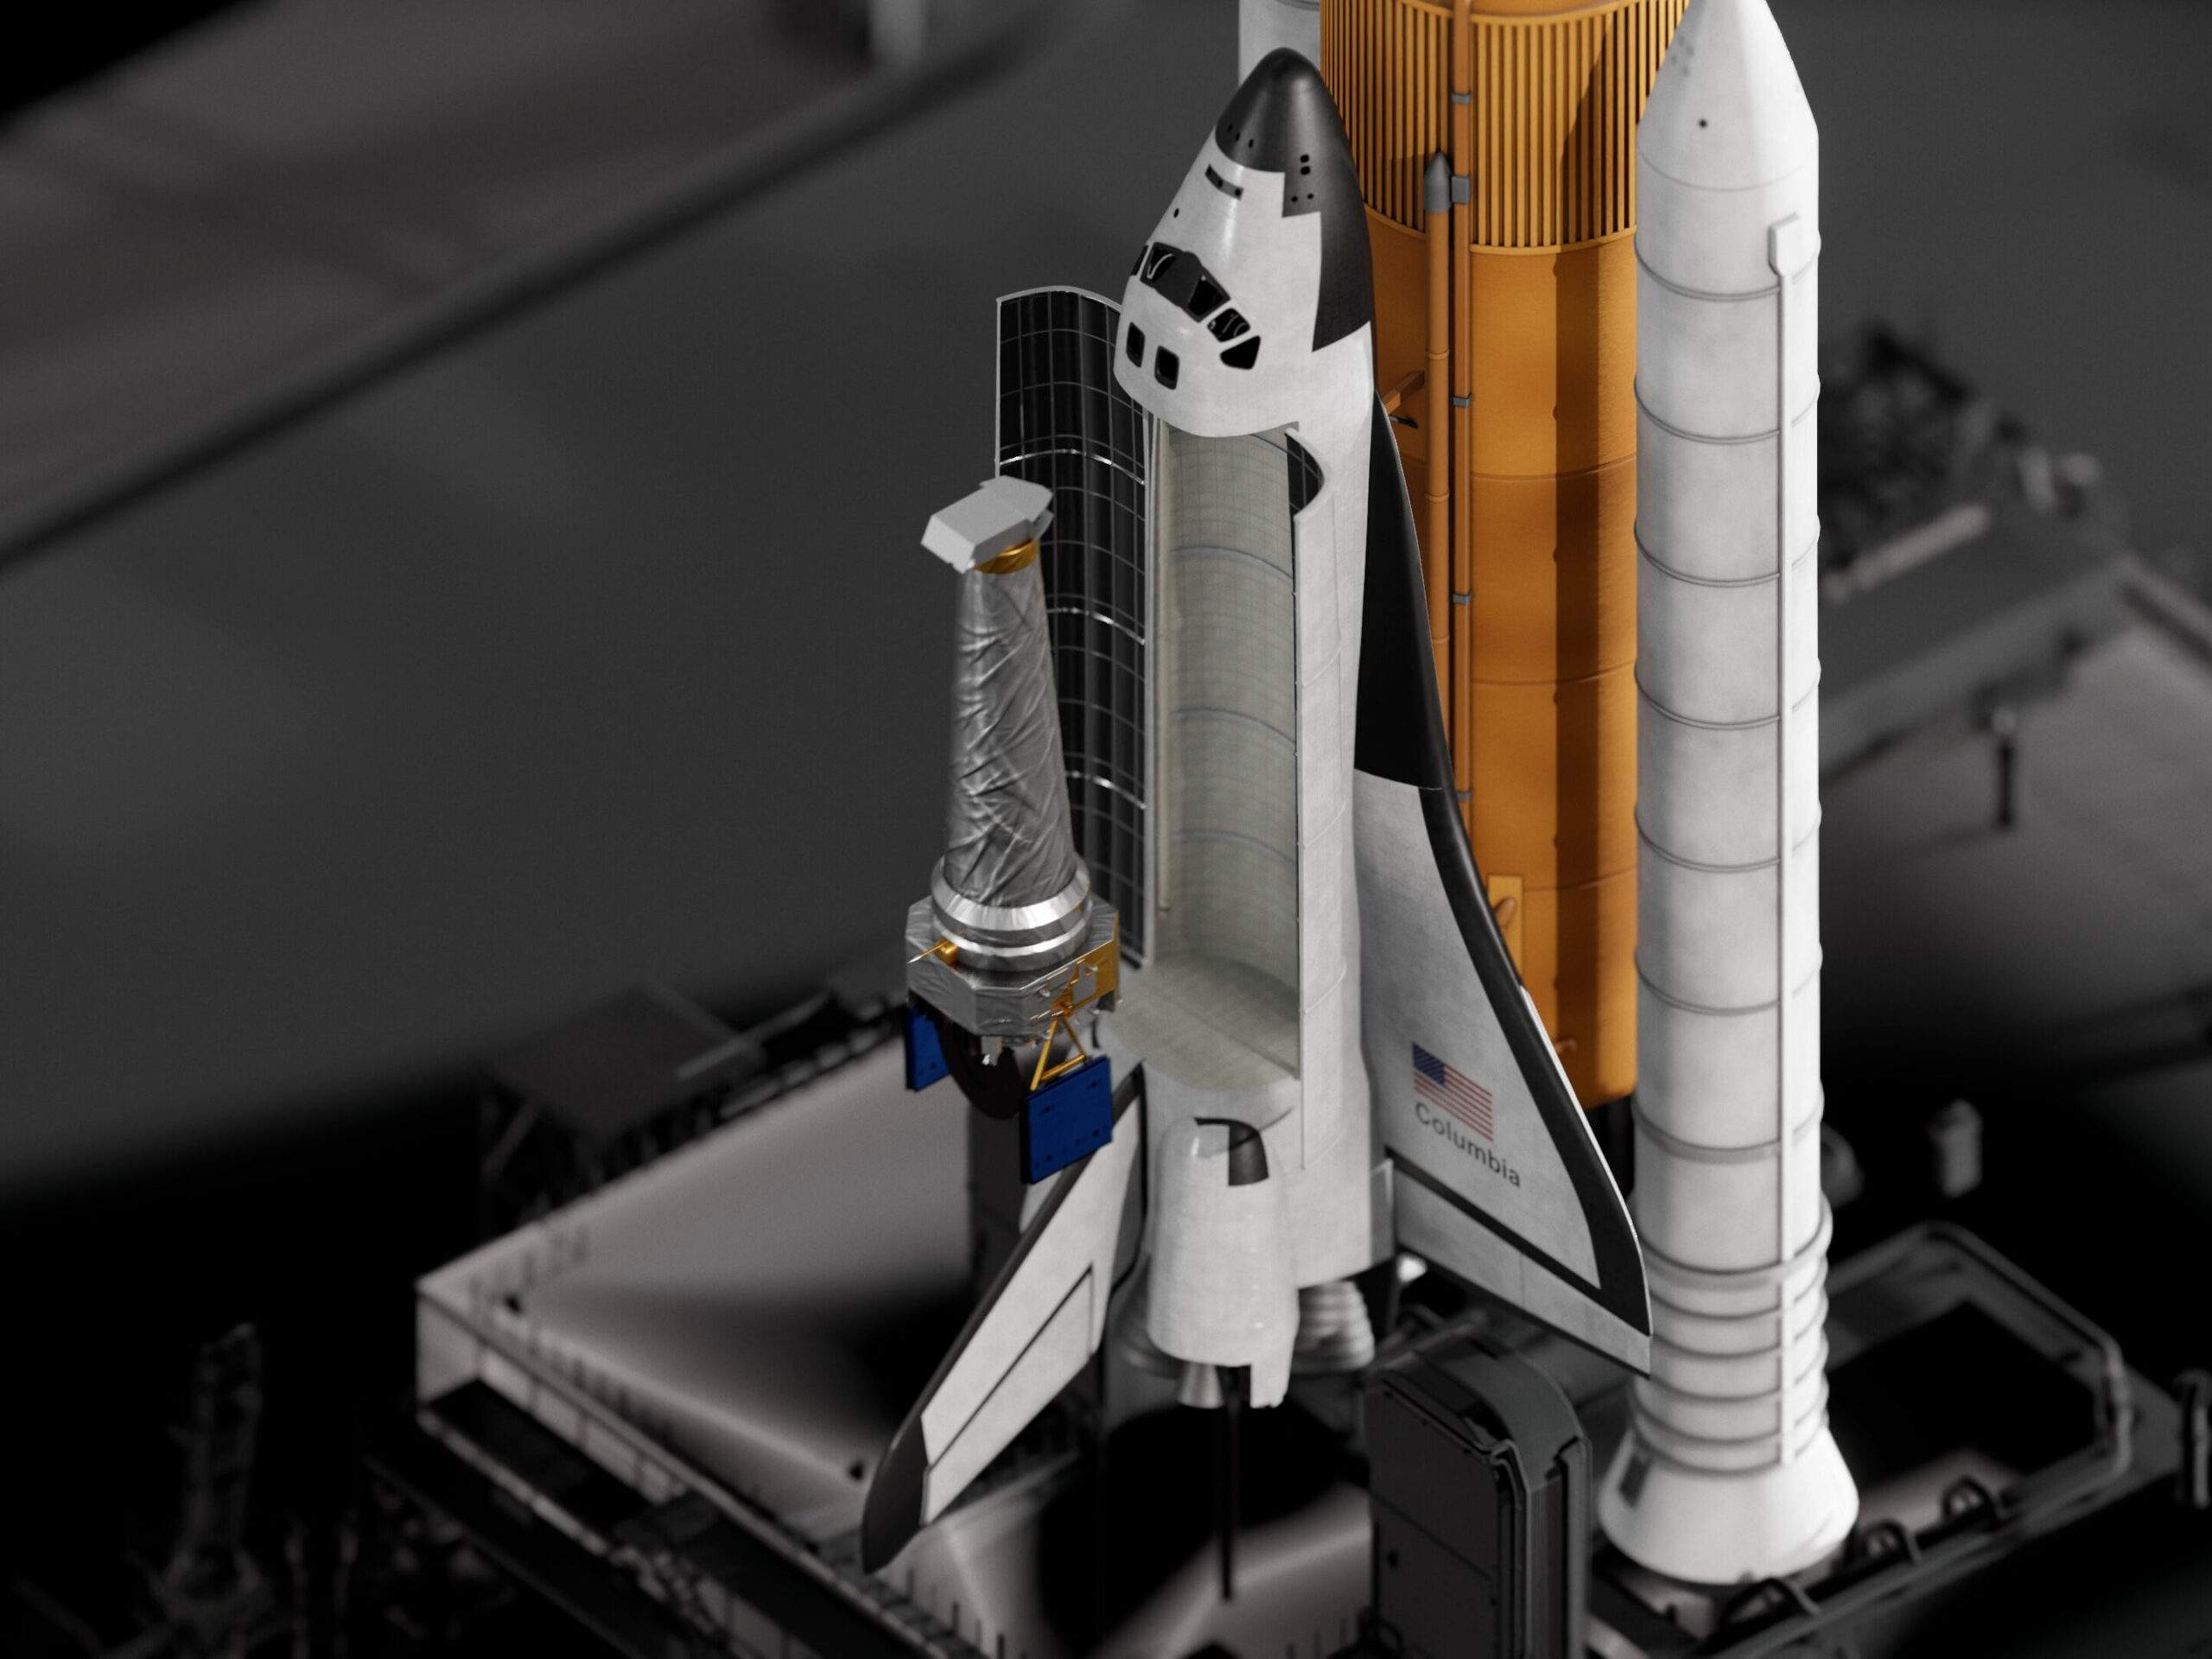 3D graphic showing how the Chandra X-ray observatory telescope fit inside the payload bay of th Space Shuttle